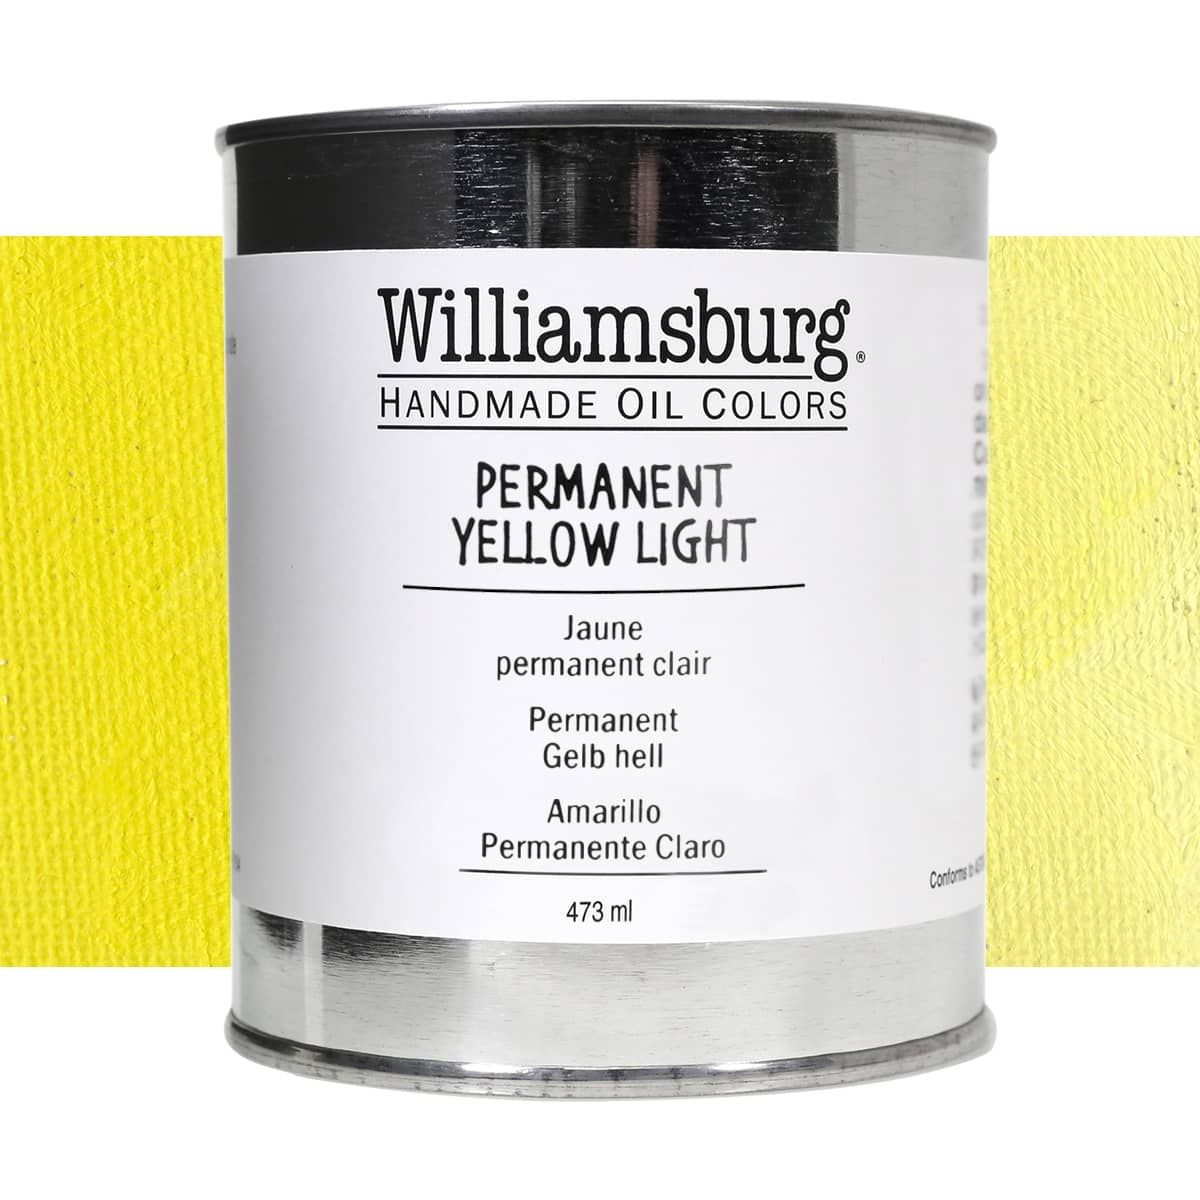 Williamsburg Oil Color 473 ml Can Permanent Yellow Light